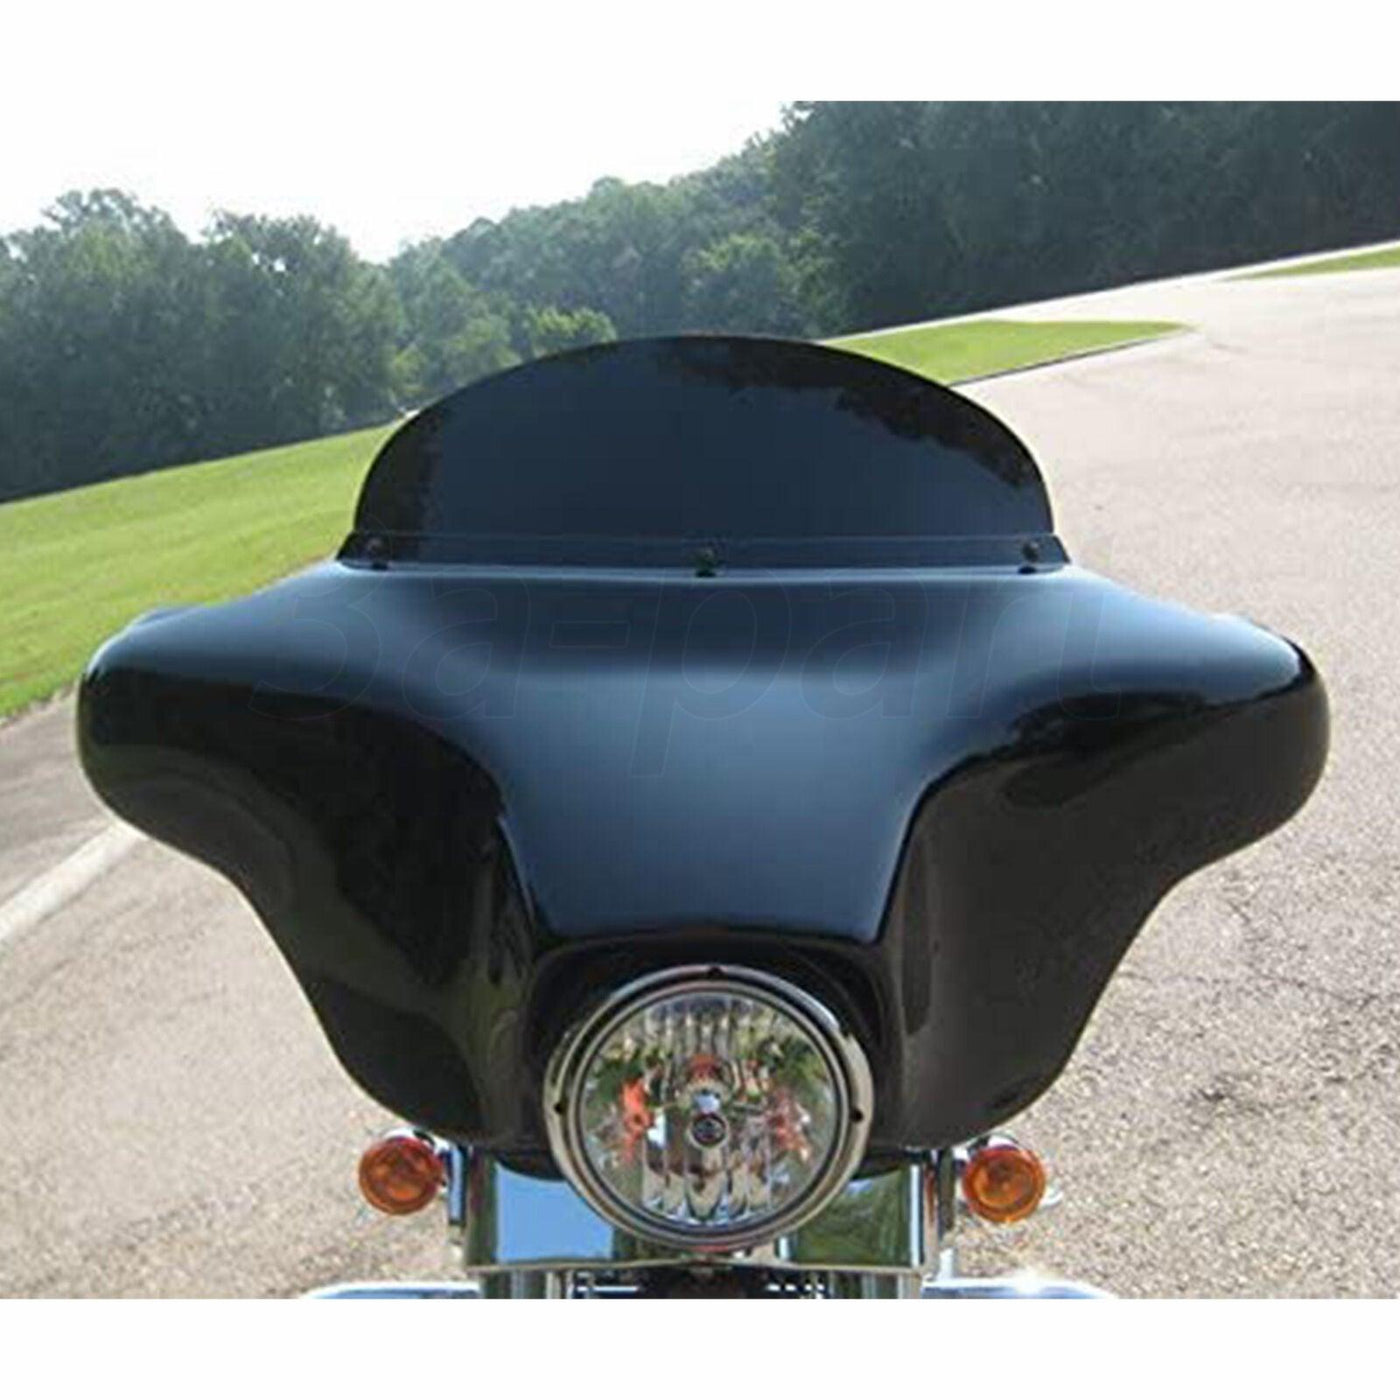 5" 6" 7" 8" 13" Dark/ Smoke Windshield Fit for Harley Electra Street Glide 96-13 - Moto Life Products